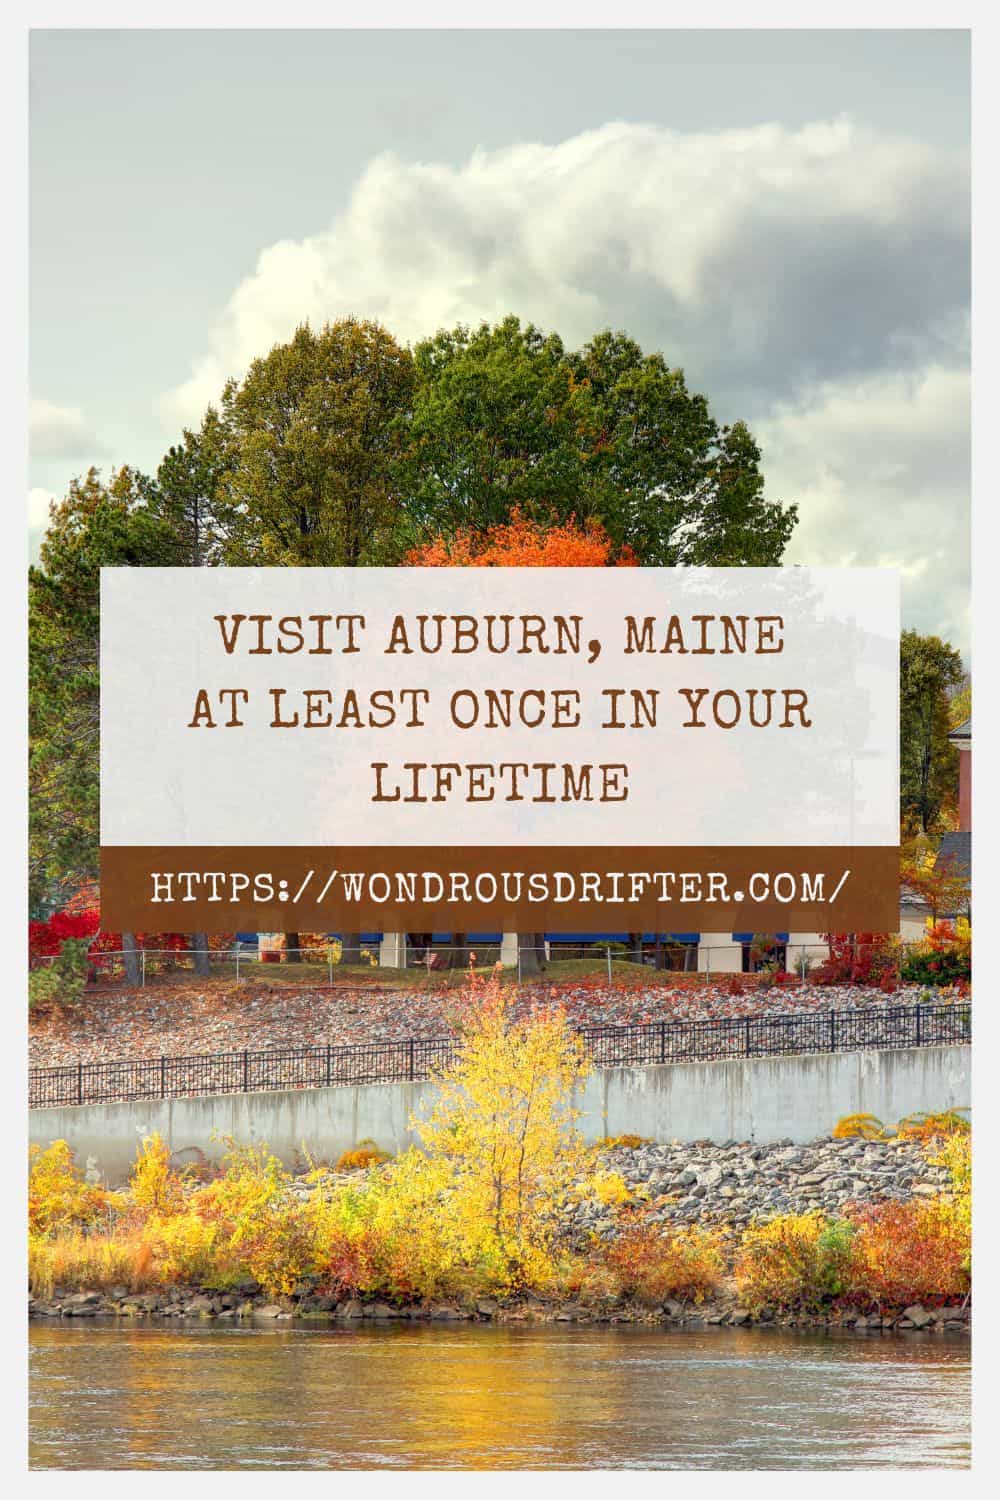 Visit Auburn Maine at least once in your lifetime